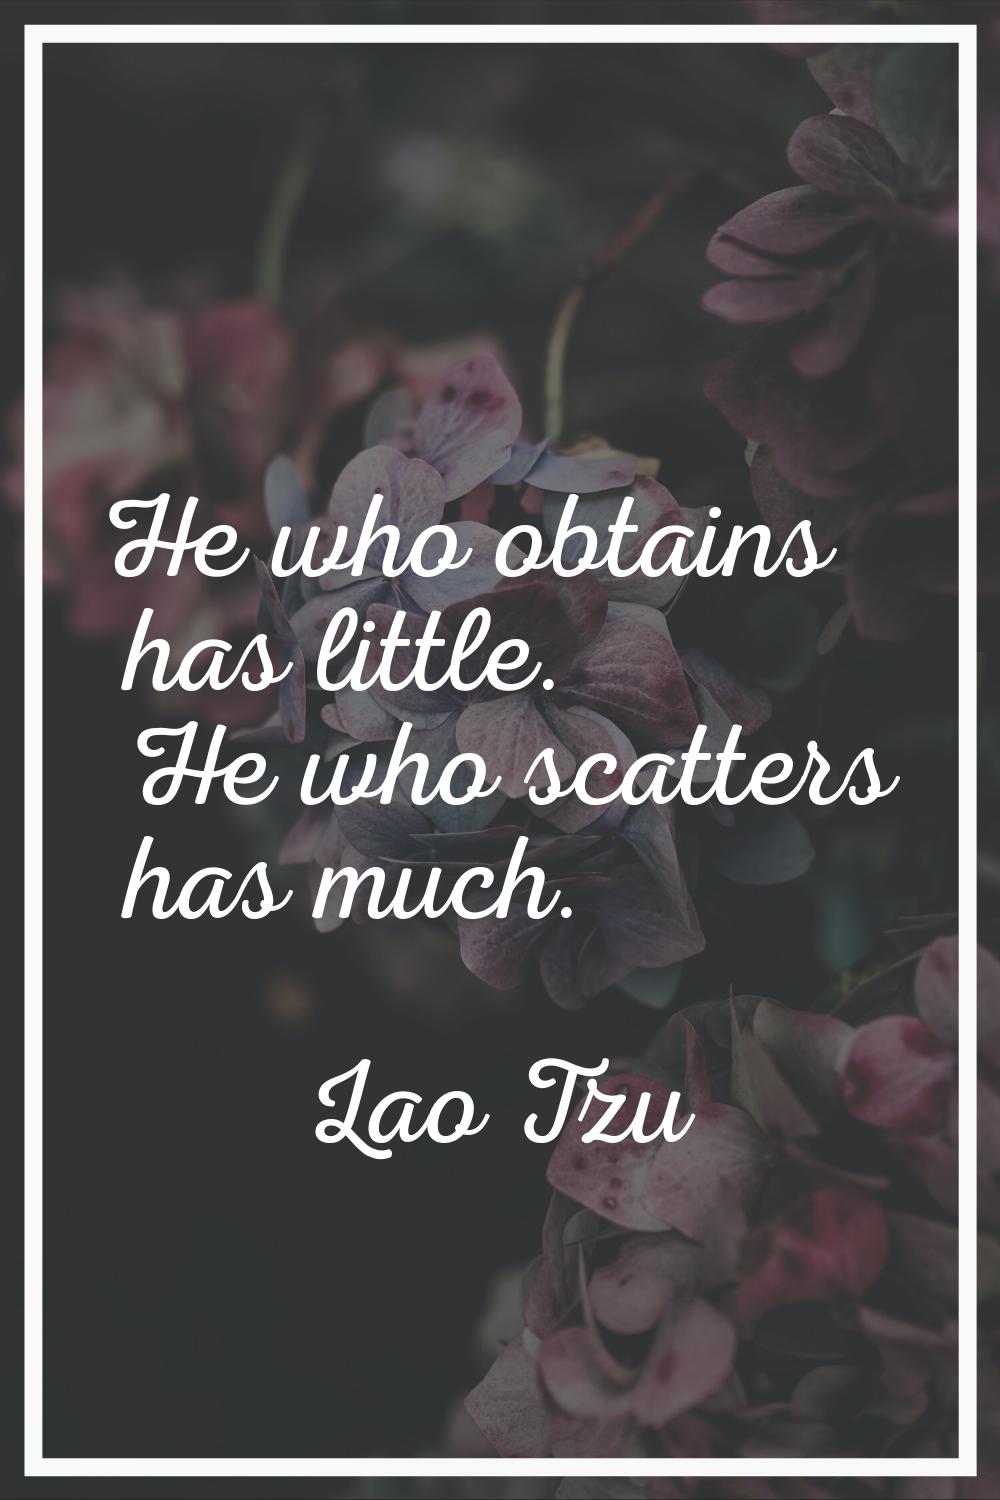 He who obtains has little. He who scatters has much.